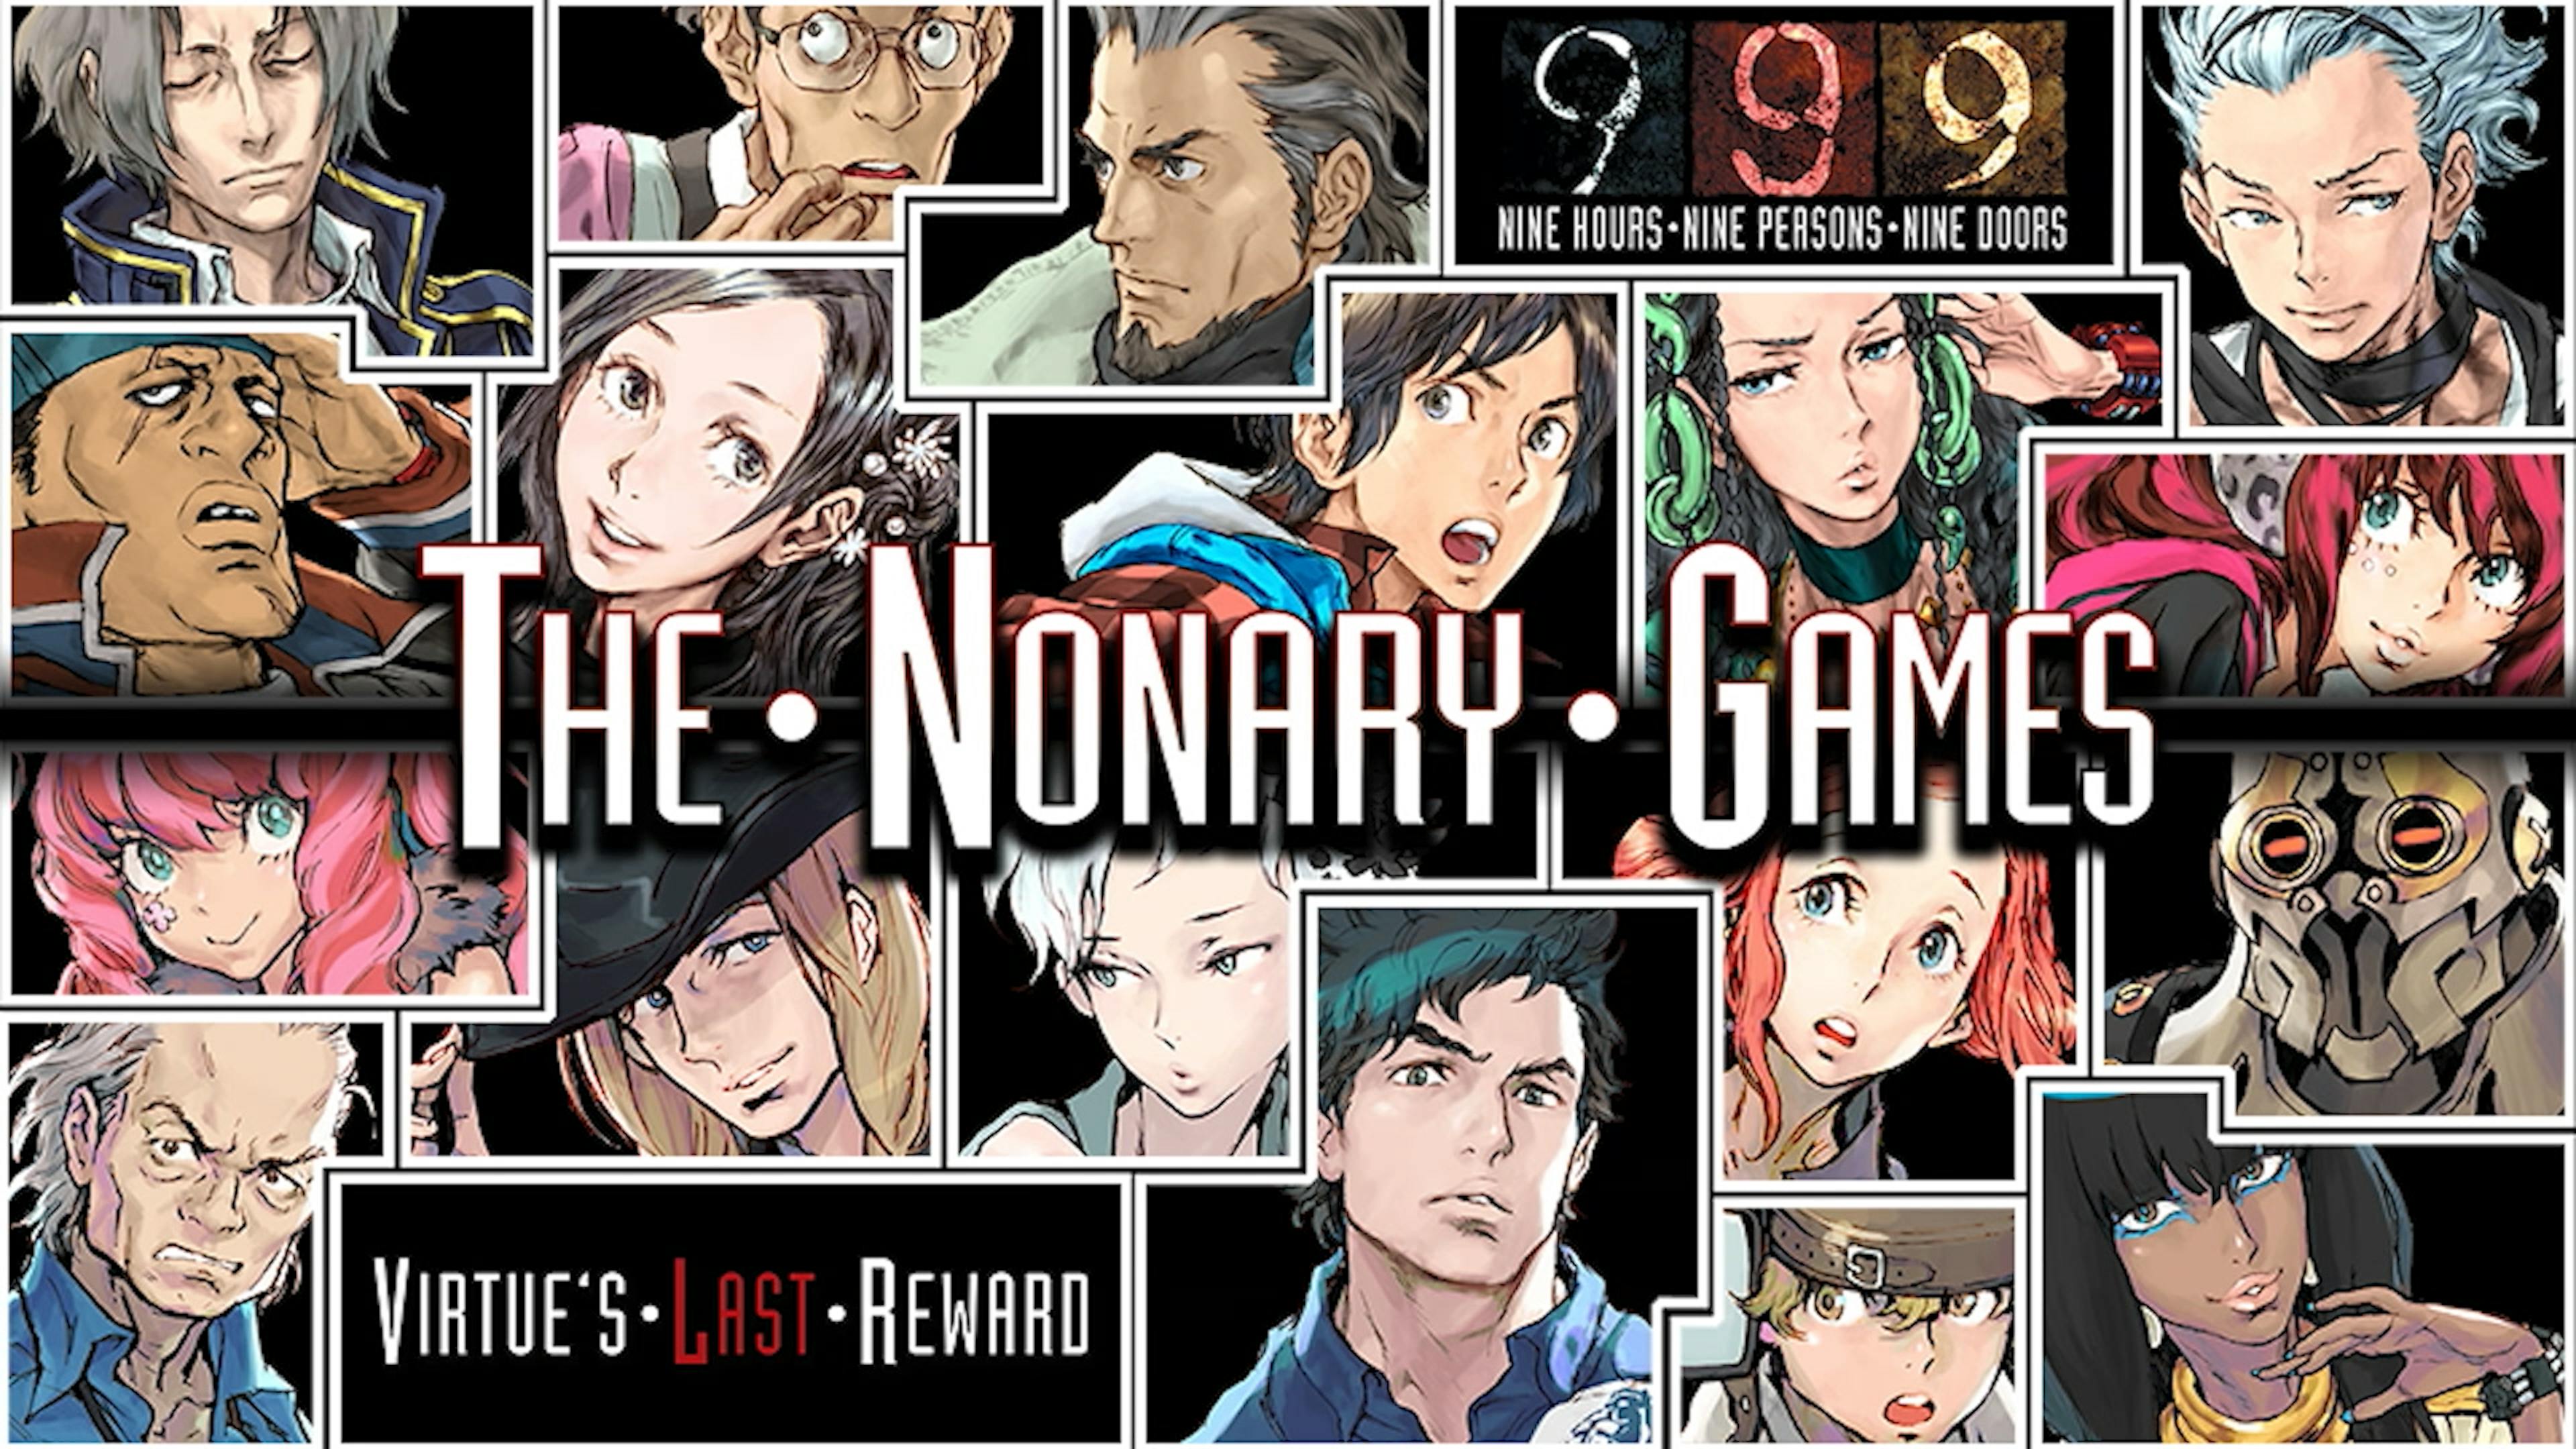 https://www.spike-chunsoft.com/news/zero-escape-the-nonary-games-available-now-for-xbox-one-and-windows-10/